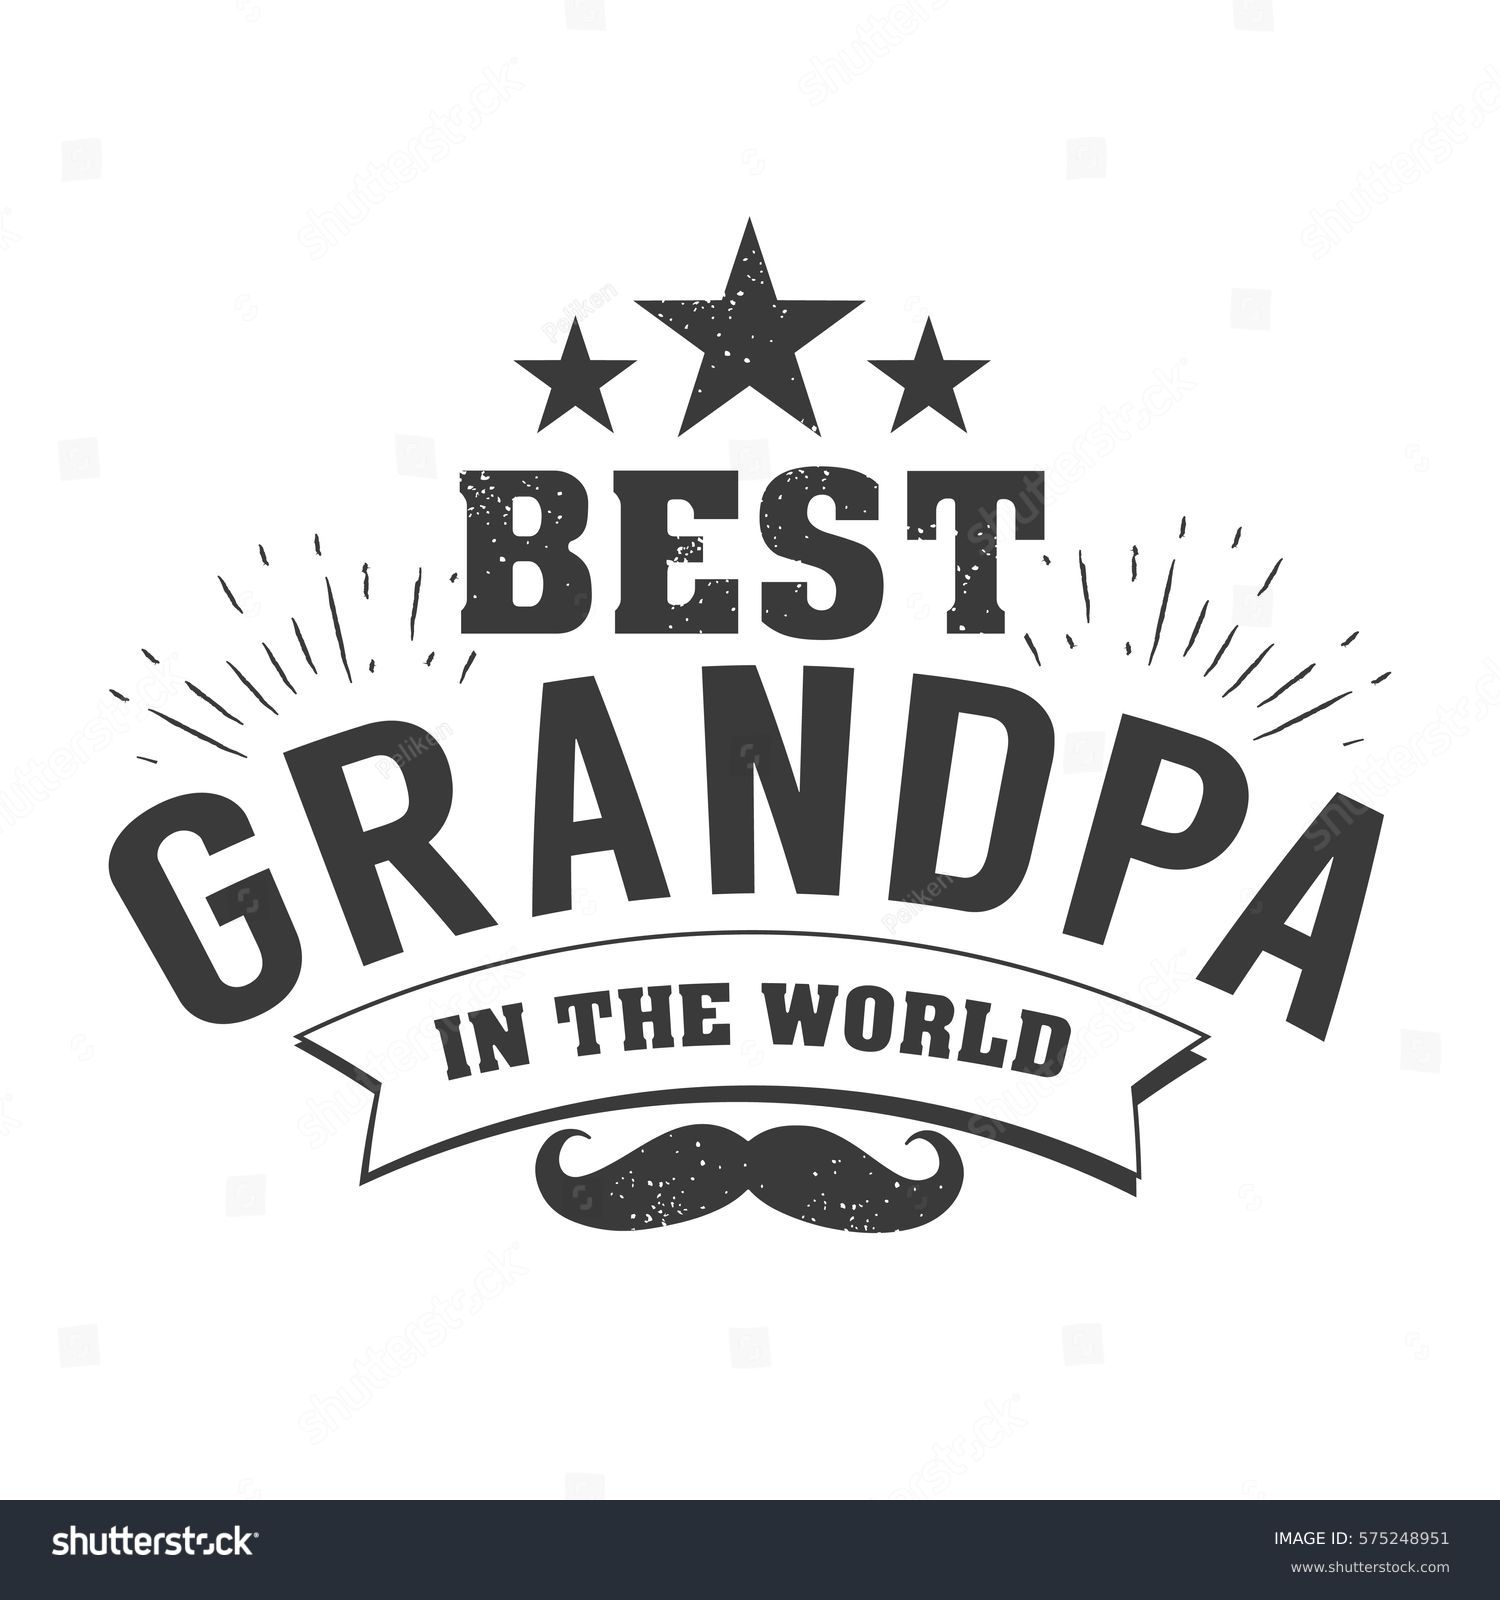 Download Isolated Grandparents Day Quotes On White Stock Vector Royalty Free 575248951